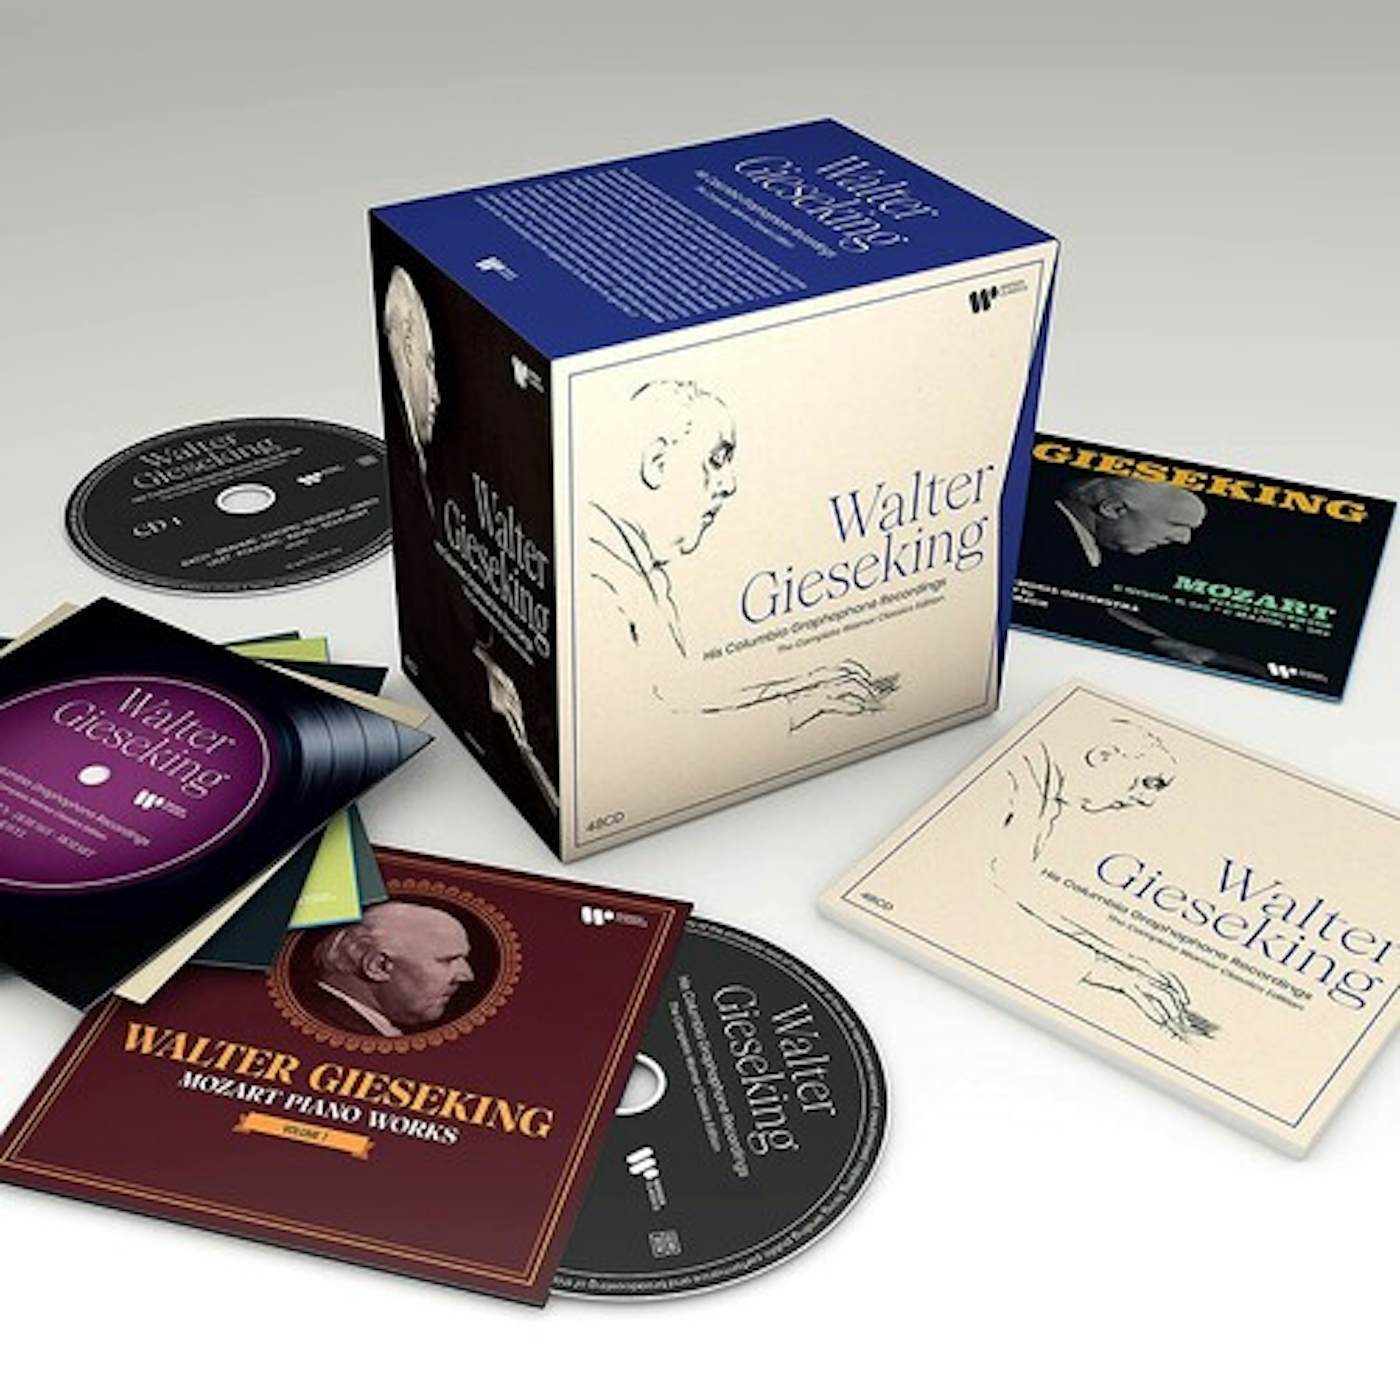 Walter Gieseking HIS COLUMBIA GRAPHOPHONE RECORDINGS - COMPLETE CD